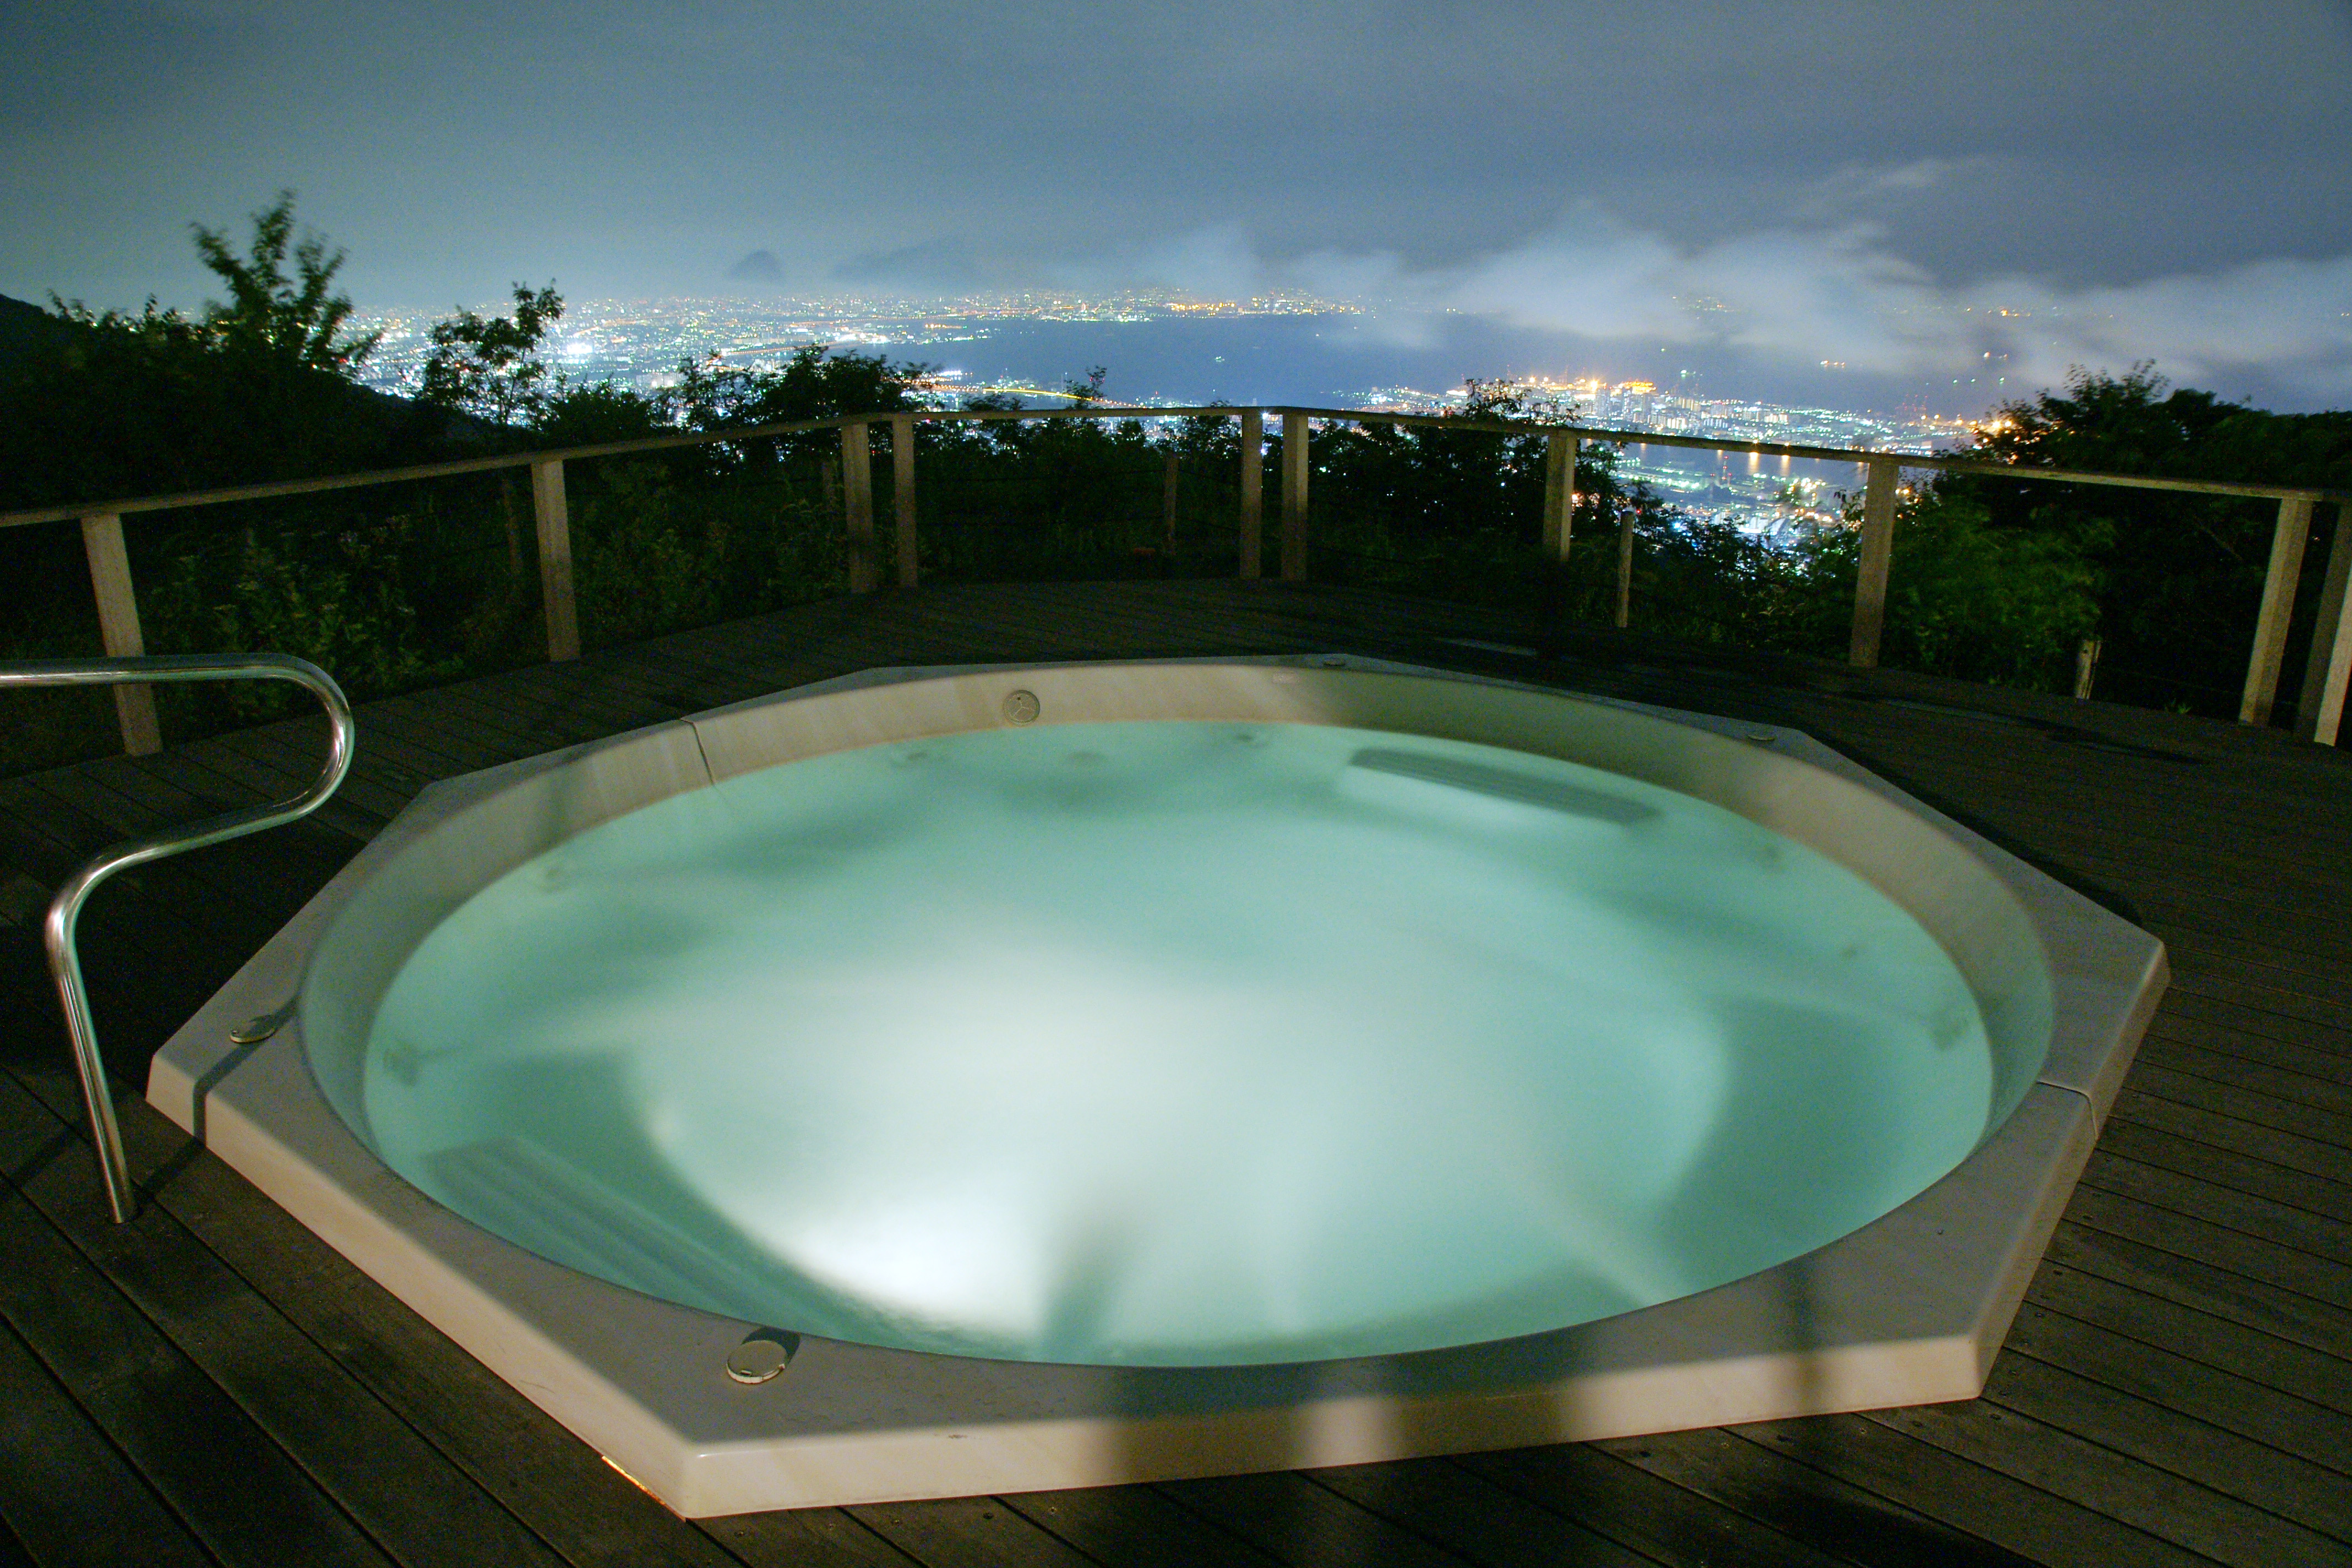 In-ground rooftop hot tub on deck